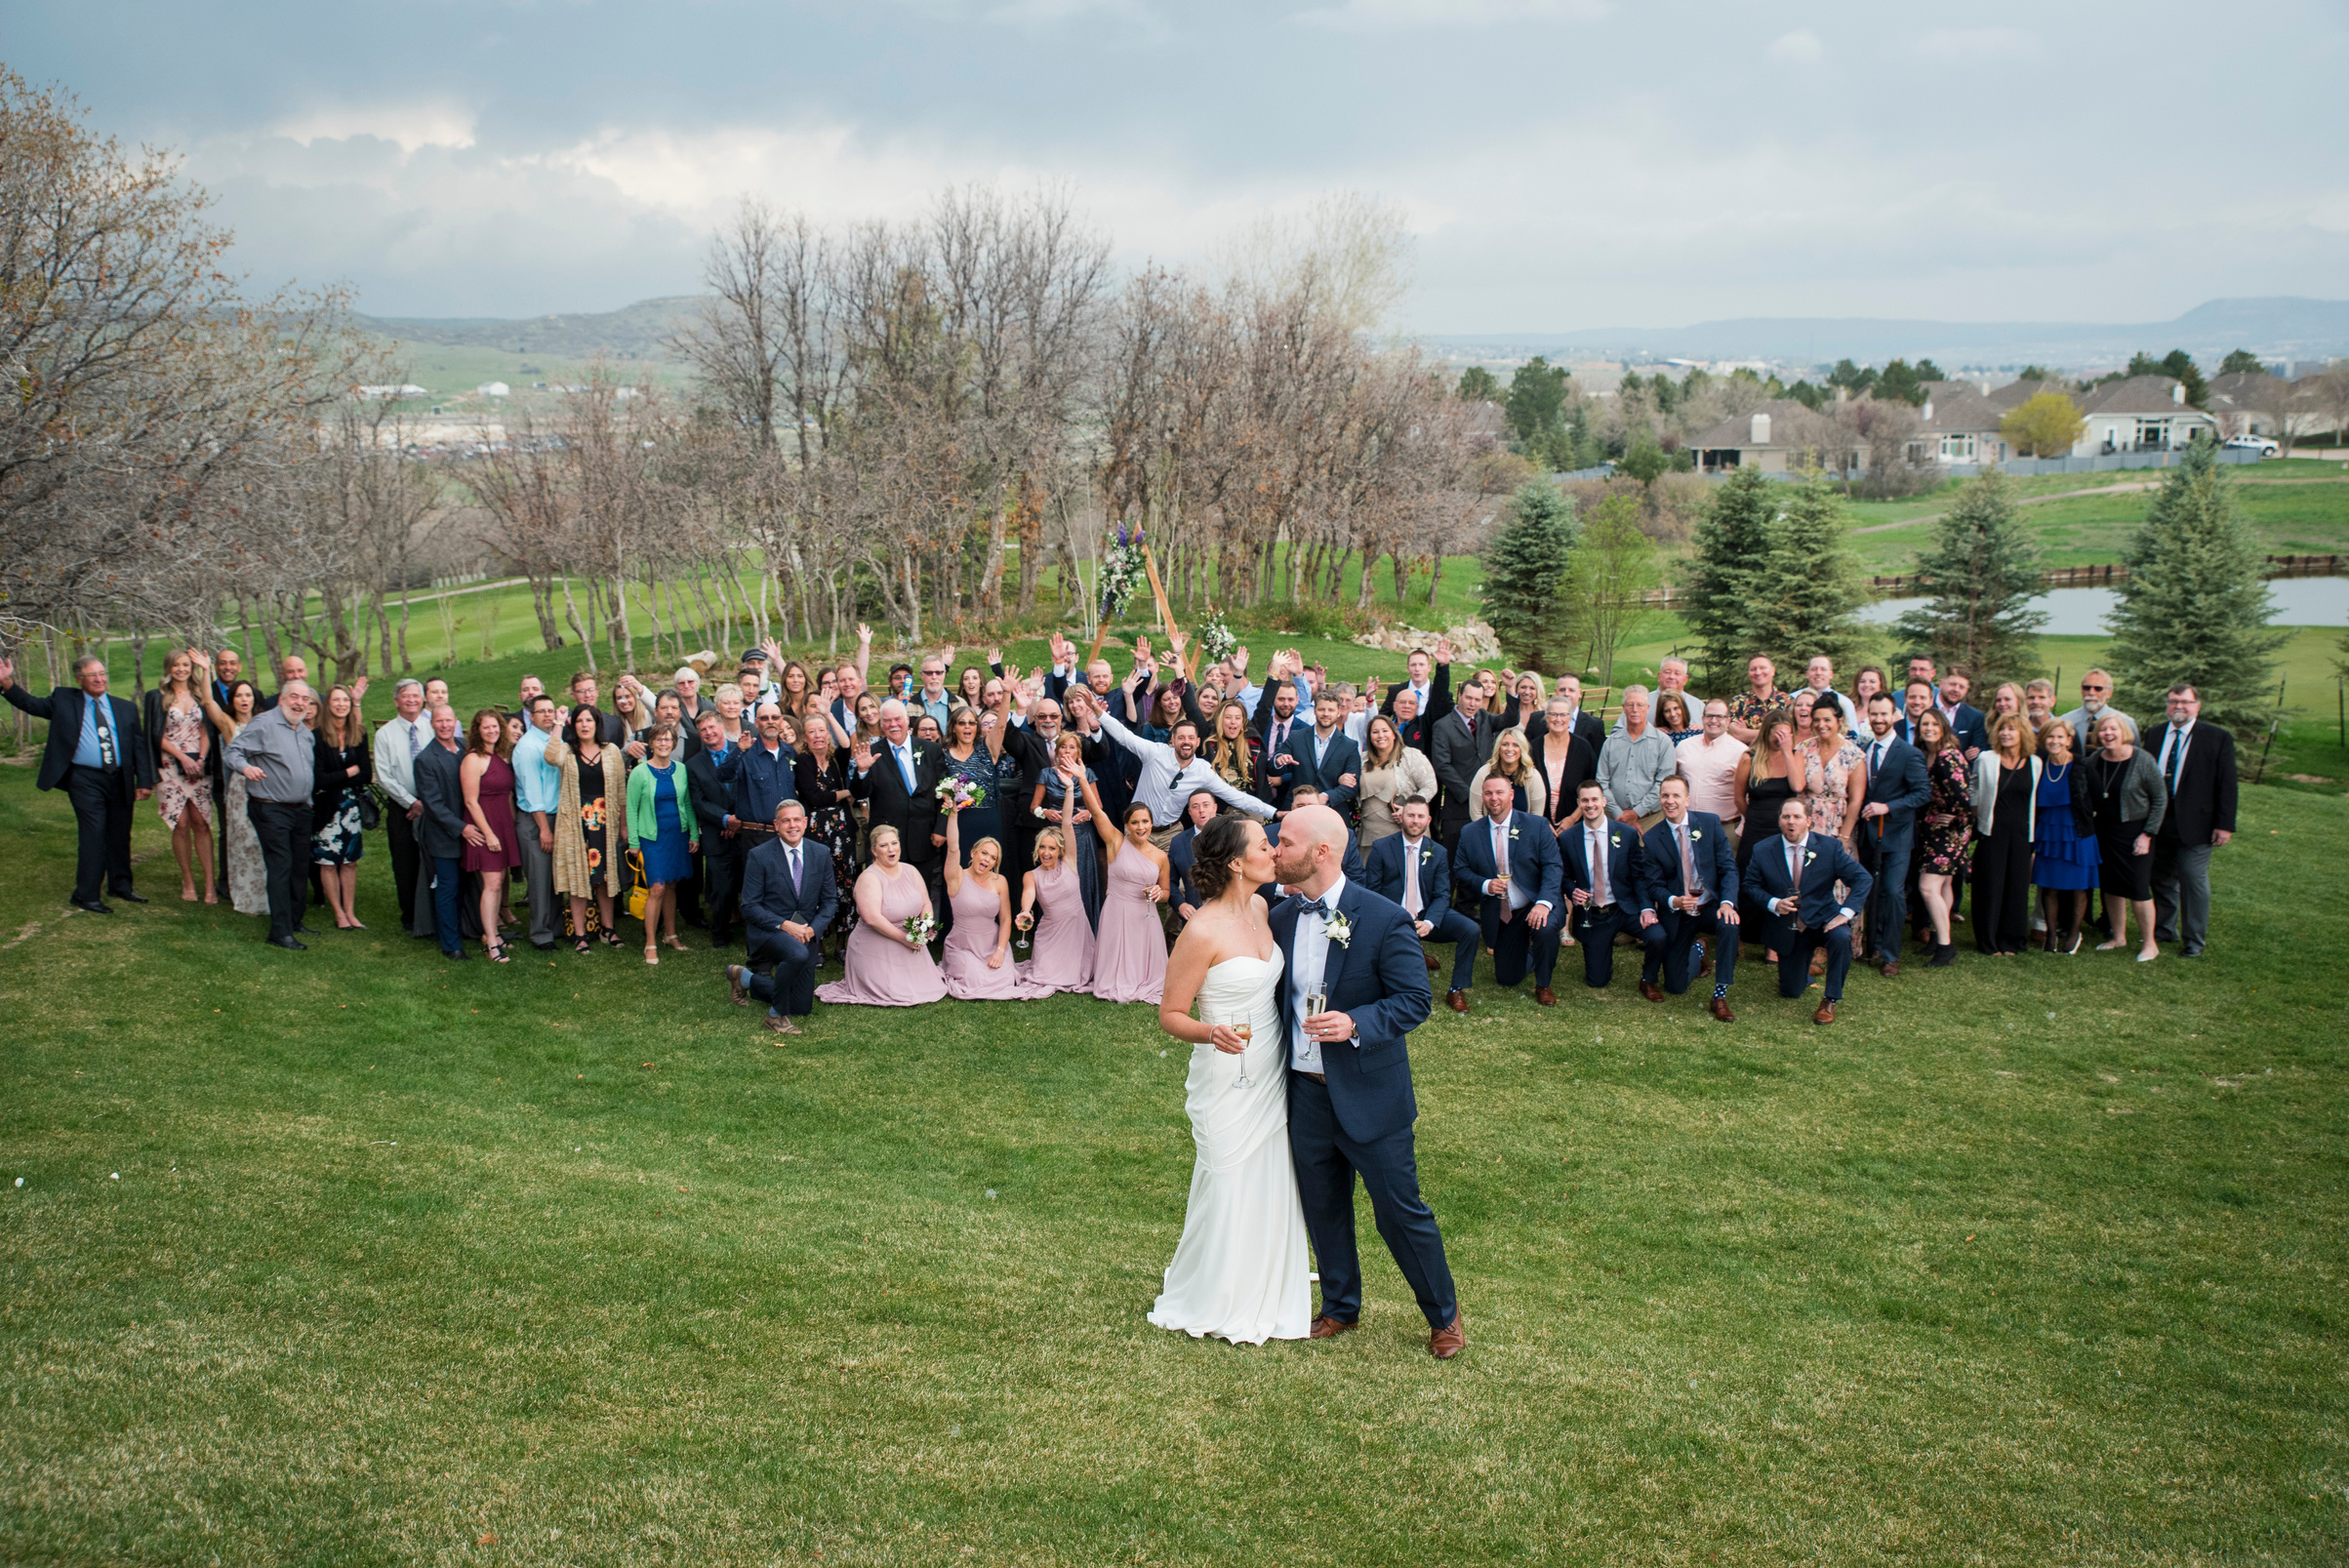 A group of all wedding guests in front of a golf course in Denver, Colorado.